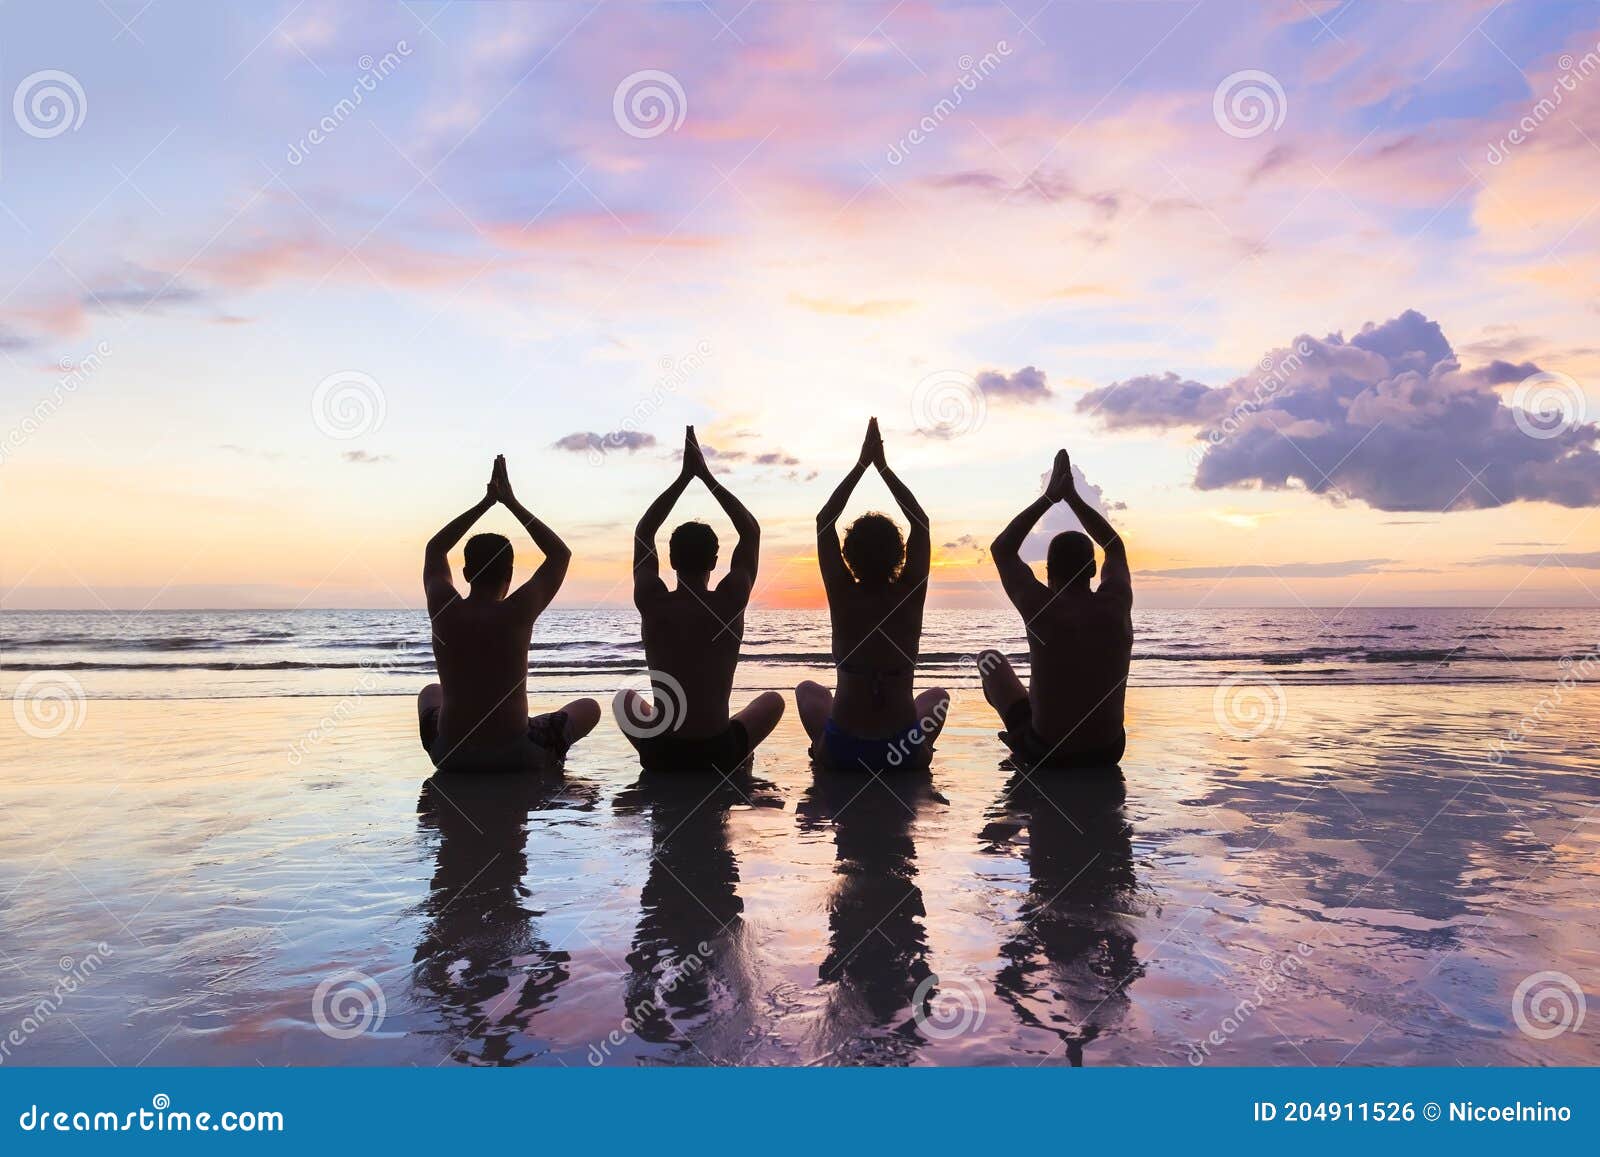 group of people practicing meditation and yoga, beach, sunset, harmony